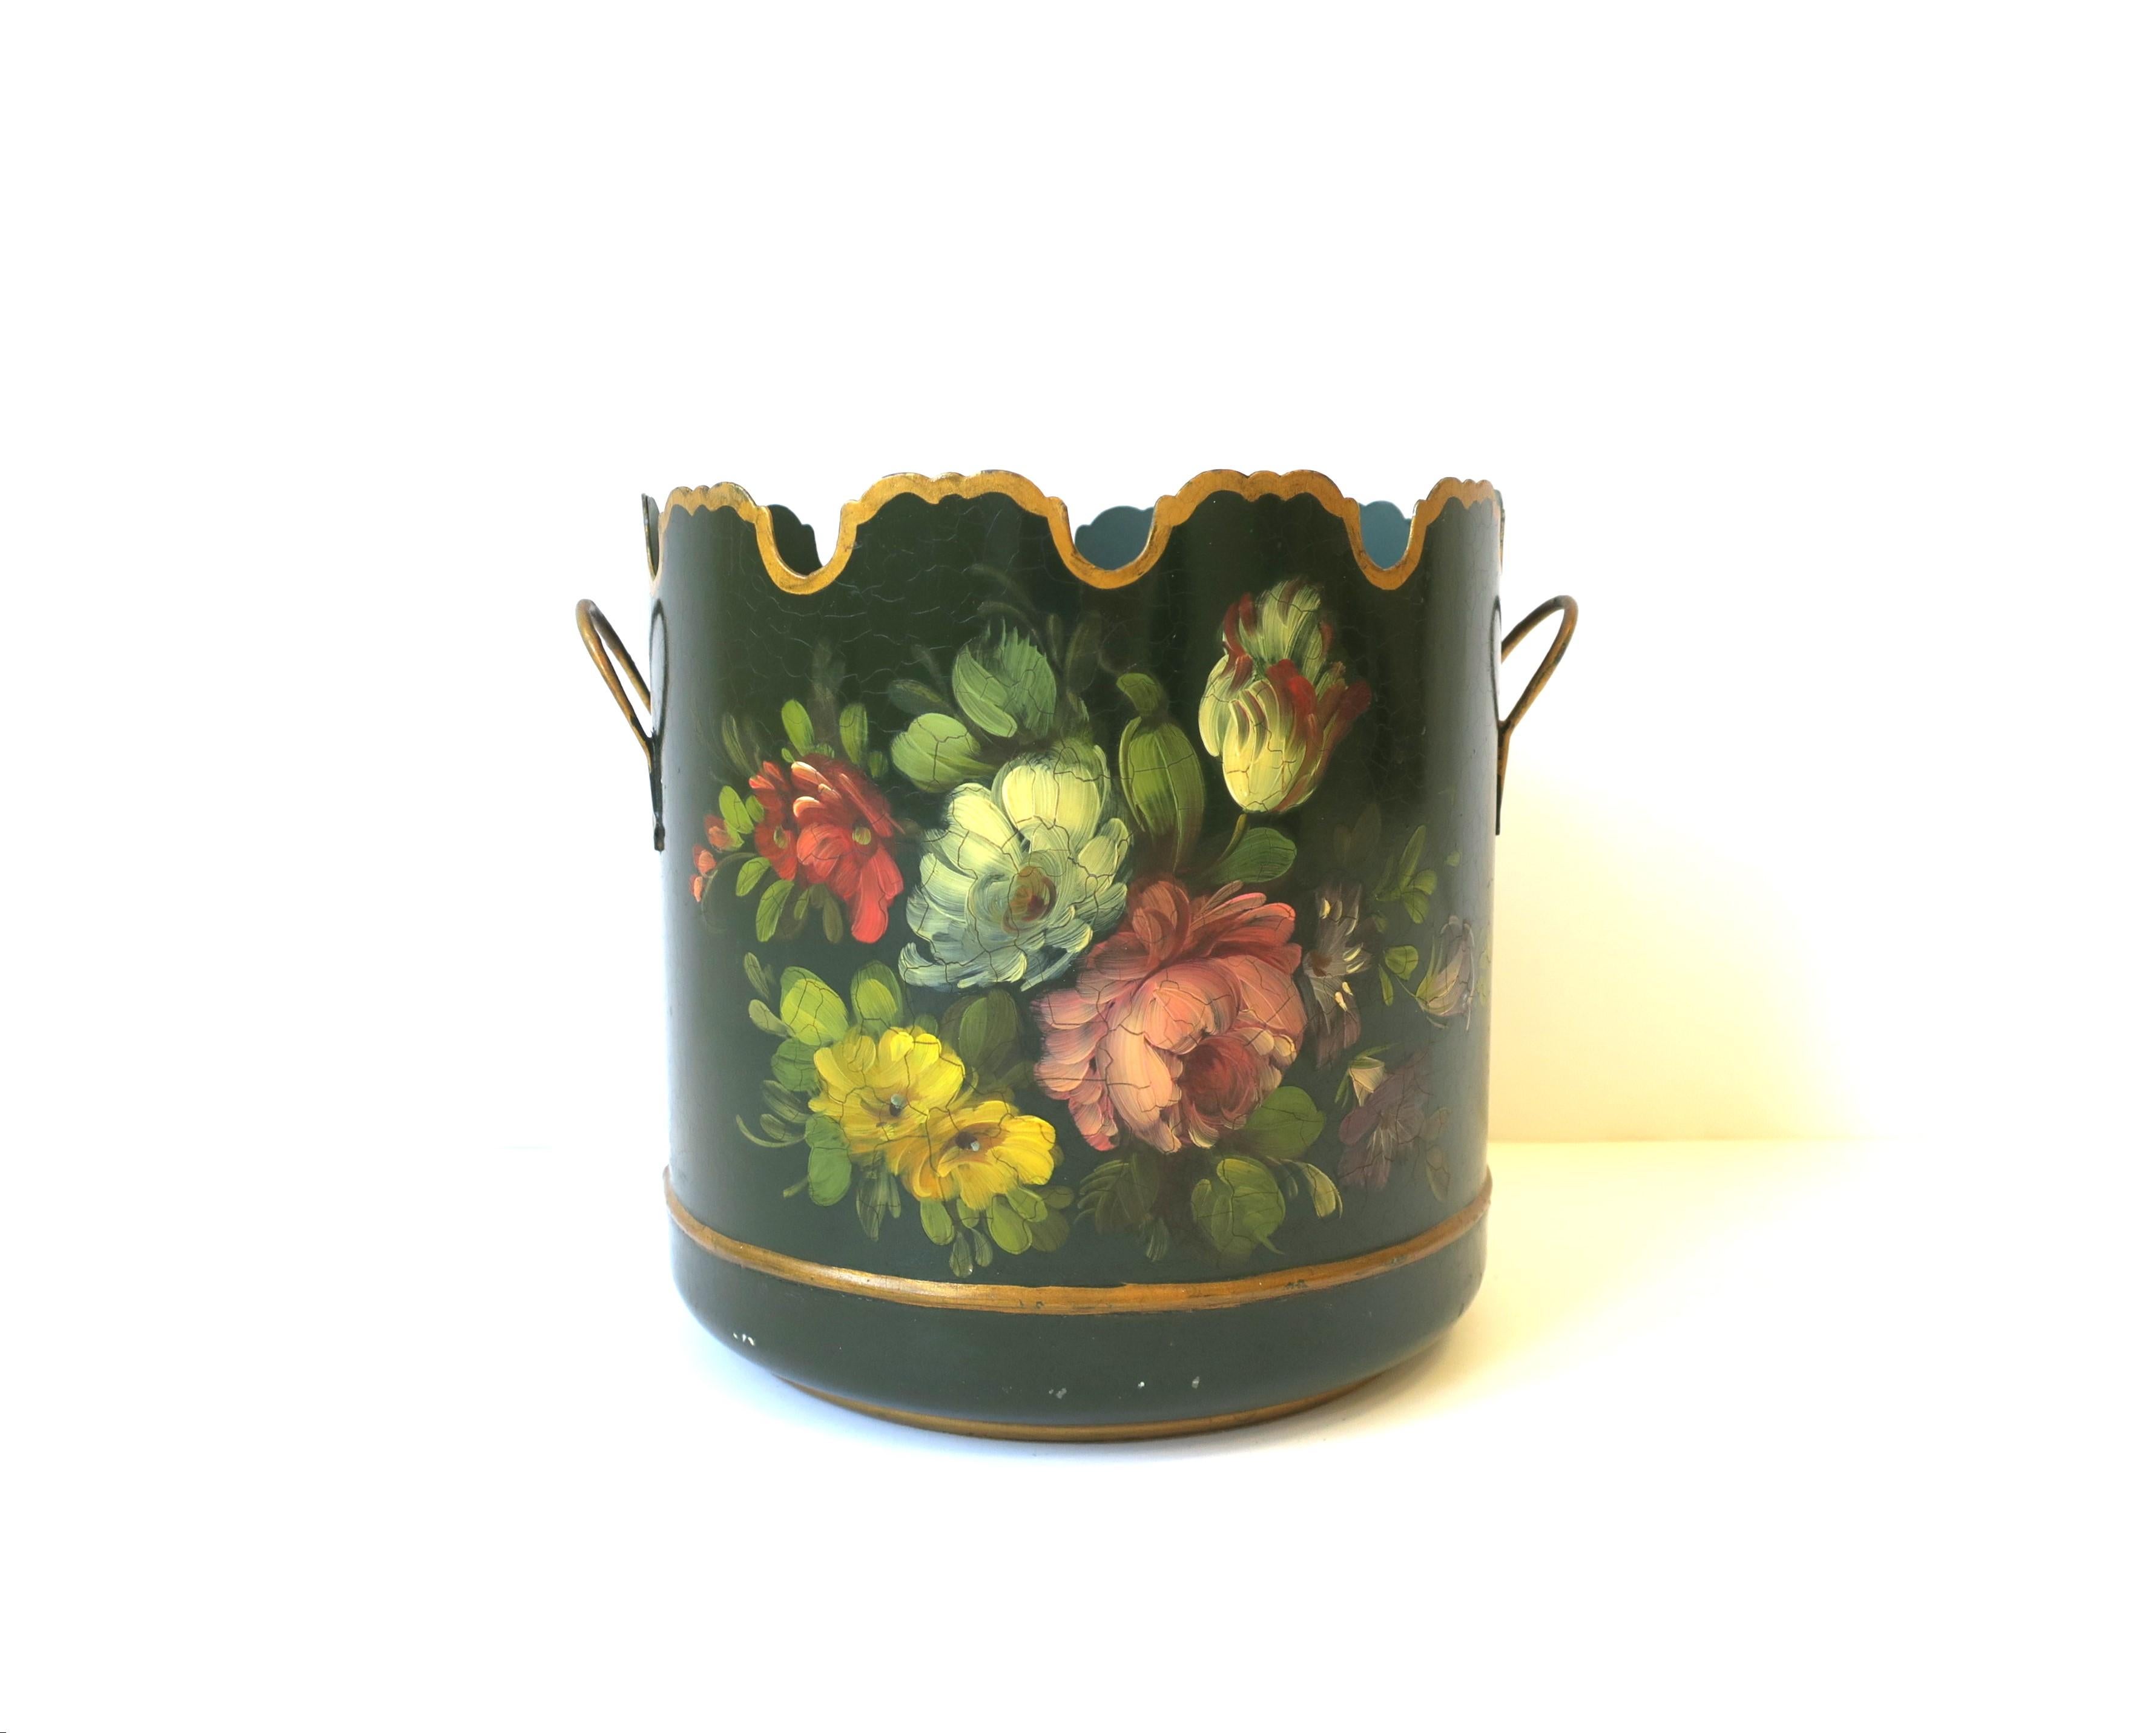 Metal French Planter Jardinière Cachepot Scalloped Edge, 20th c France For Sale